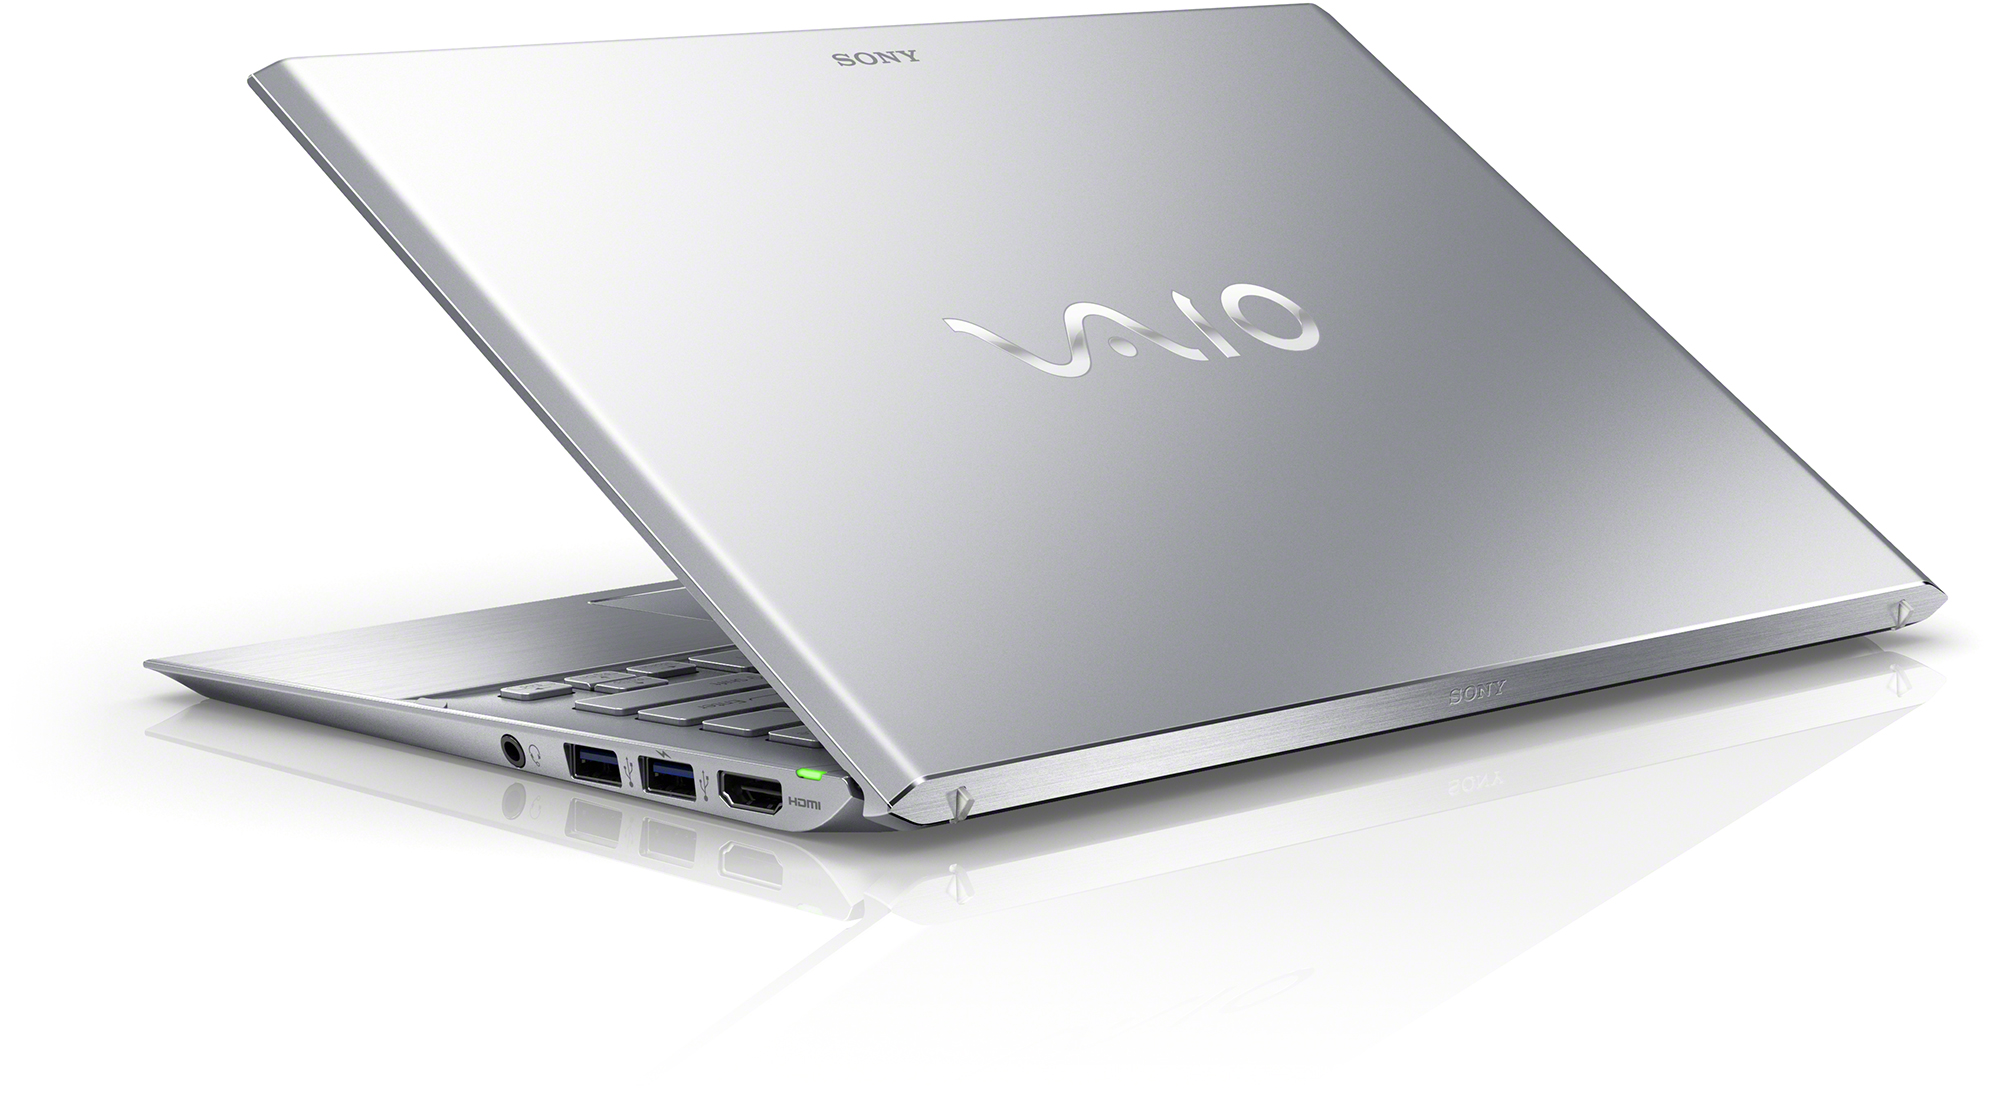 Onia Irony: Sony leaves the PC market and discards its “VAIO” brand